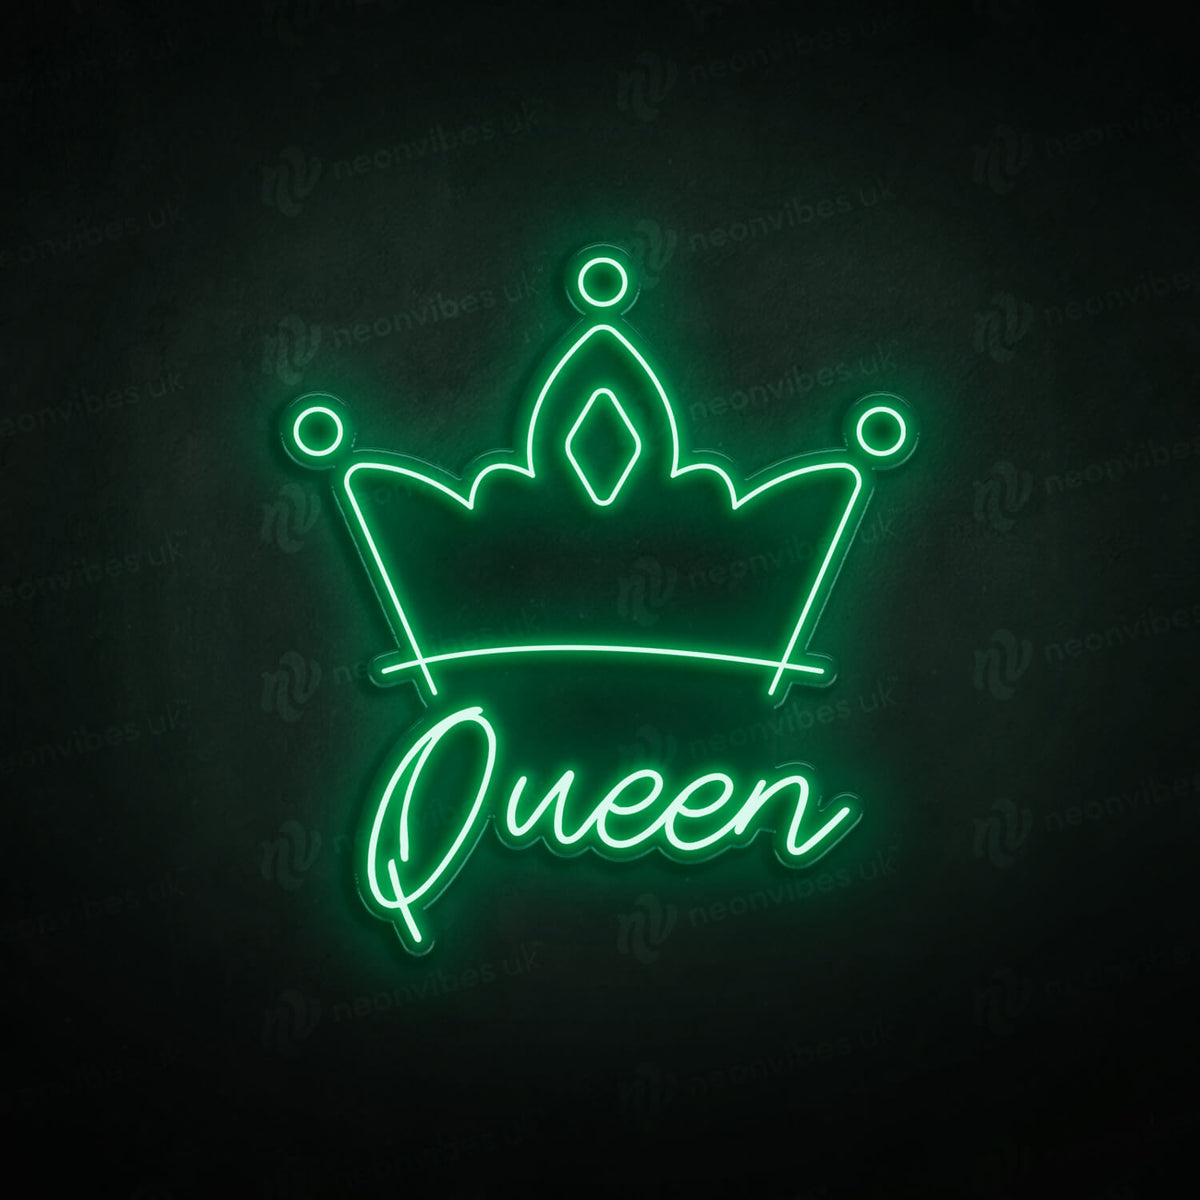 Queen and Crown neon sign